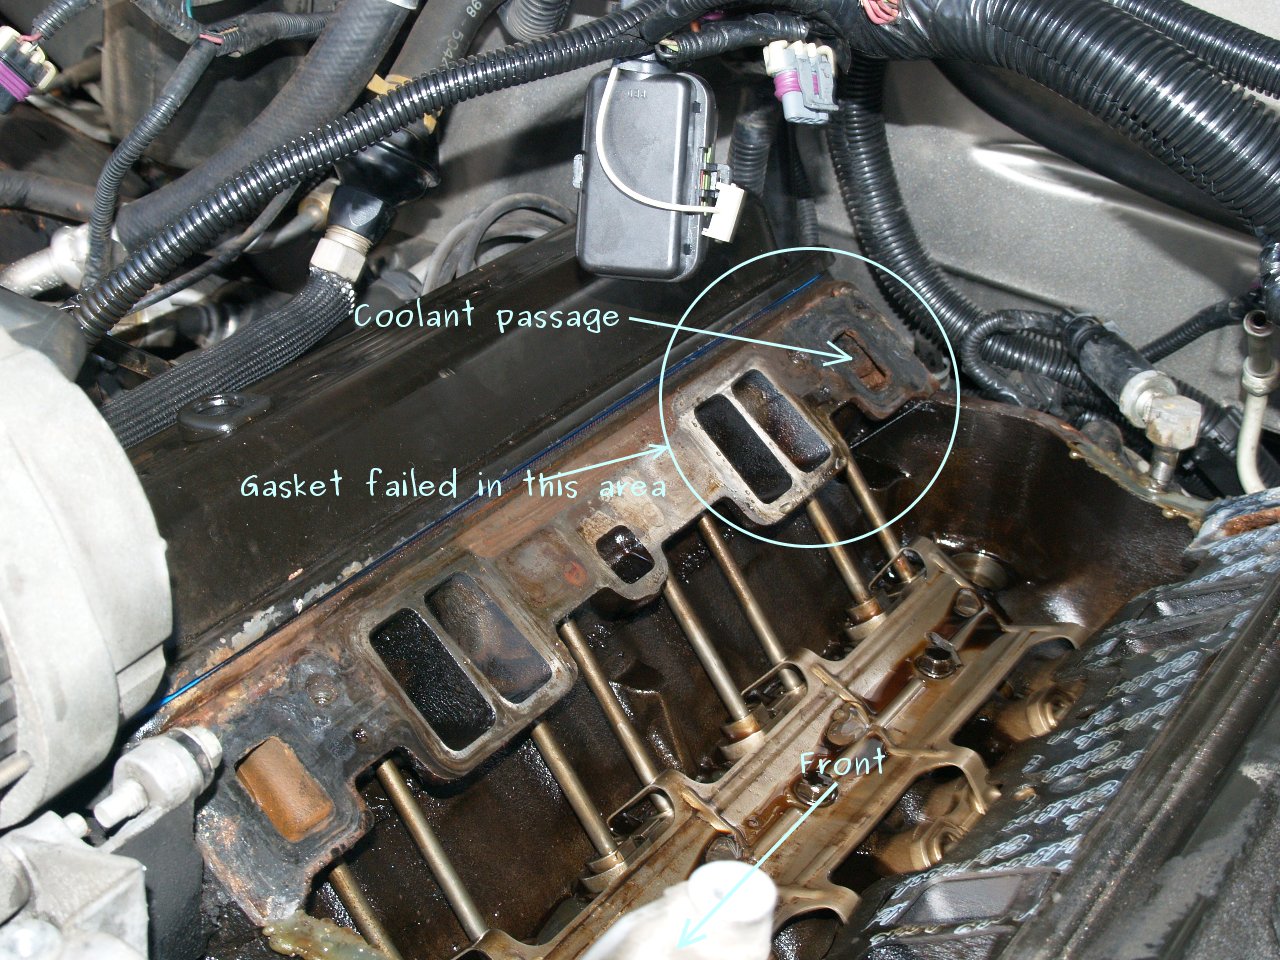 See P2920 in engine